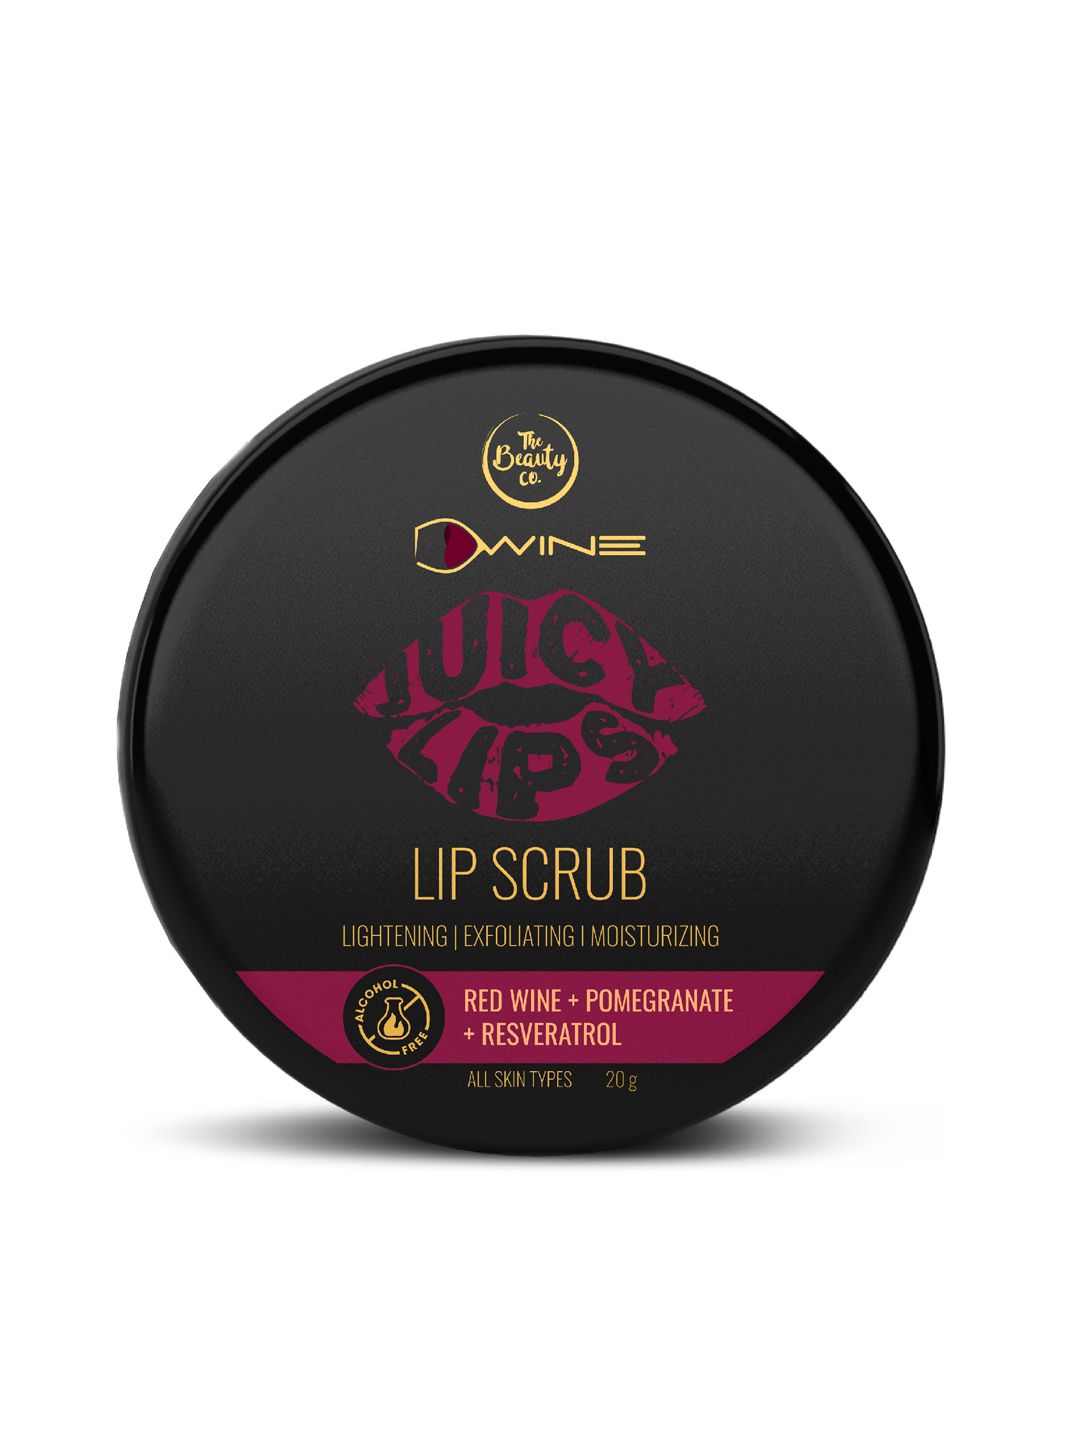 The Beauty Co. D'Wine Juicy Red Wine & Pomegranate Reservation Lip Scrub Price in India